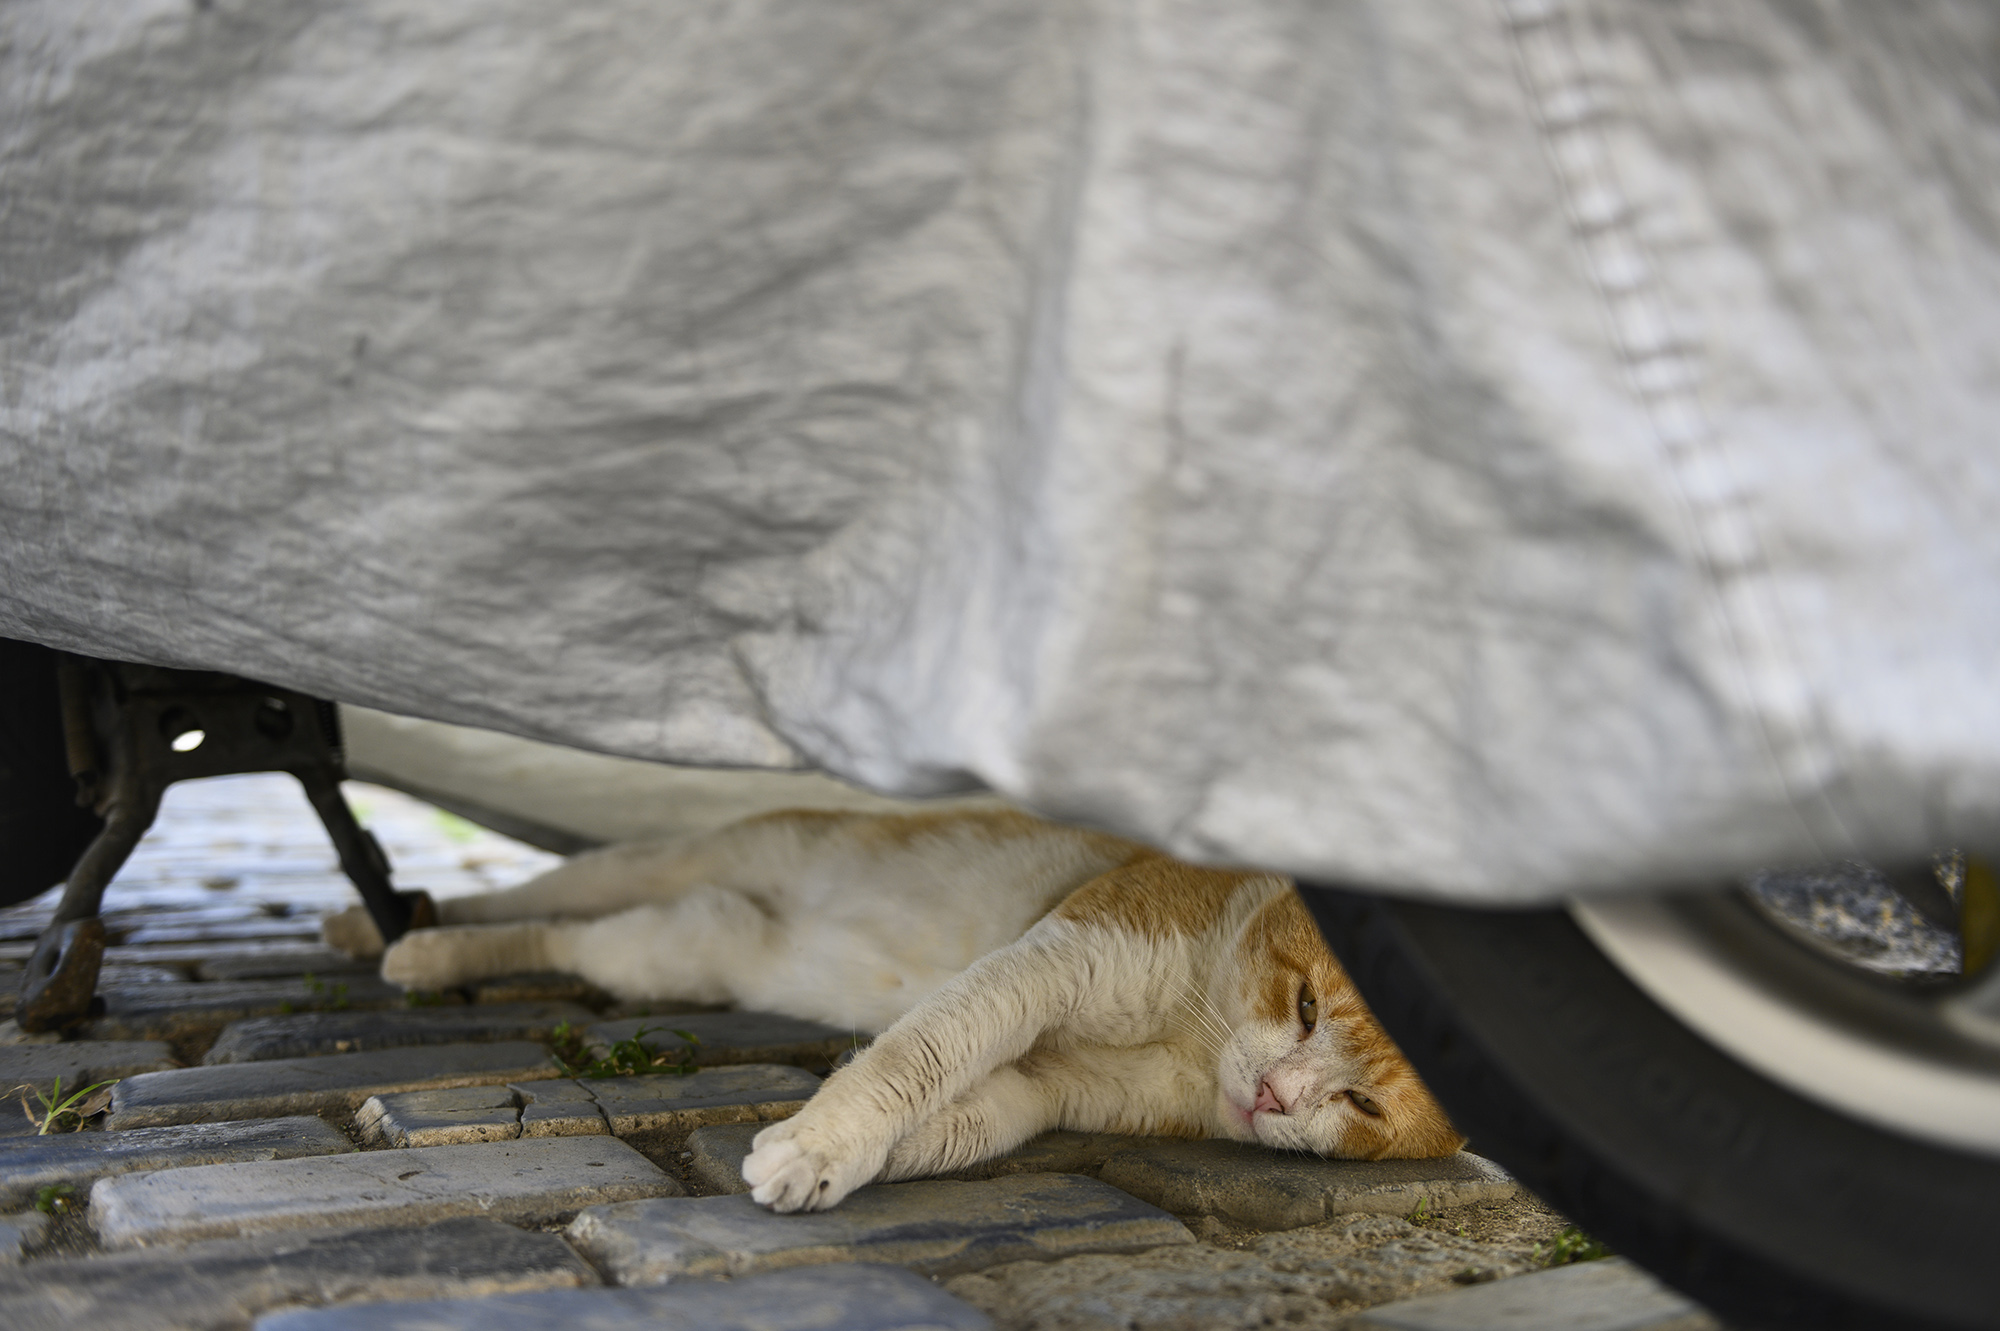 A cat takes shelter on the cobblestone streets of Old San Juan. Photo by Caitlin Lee